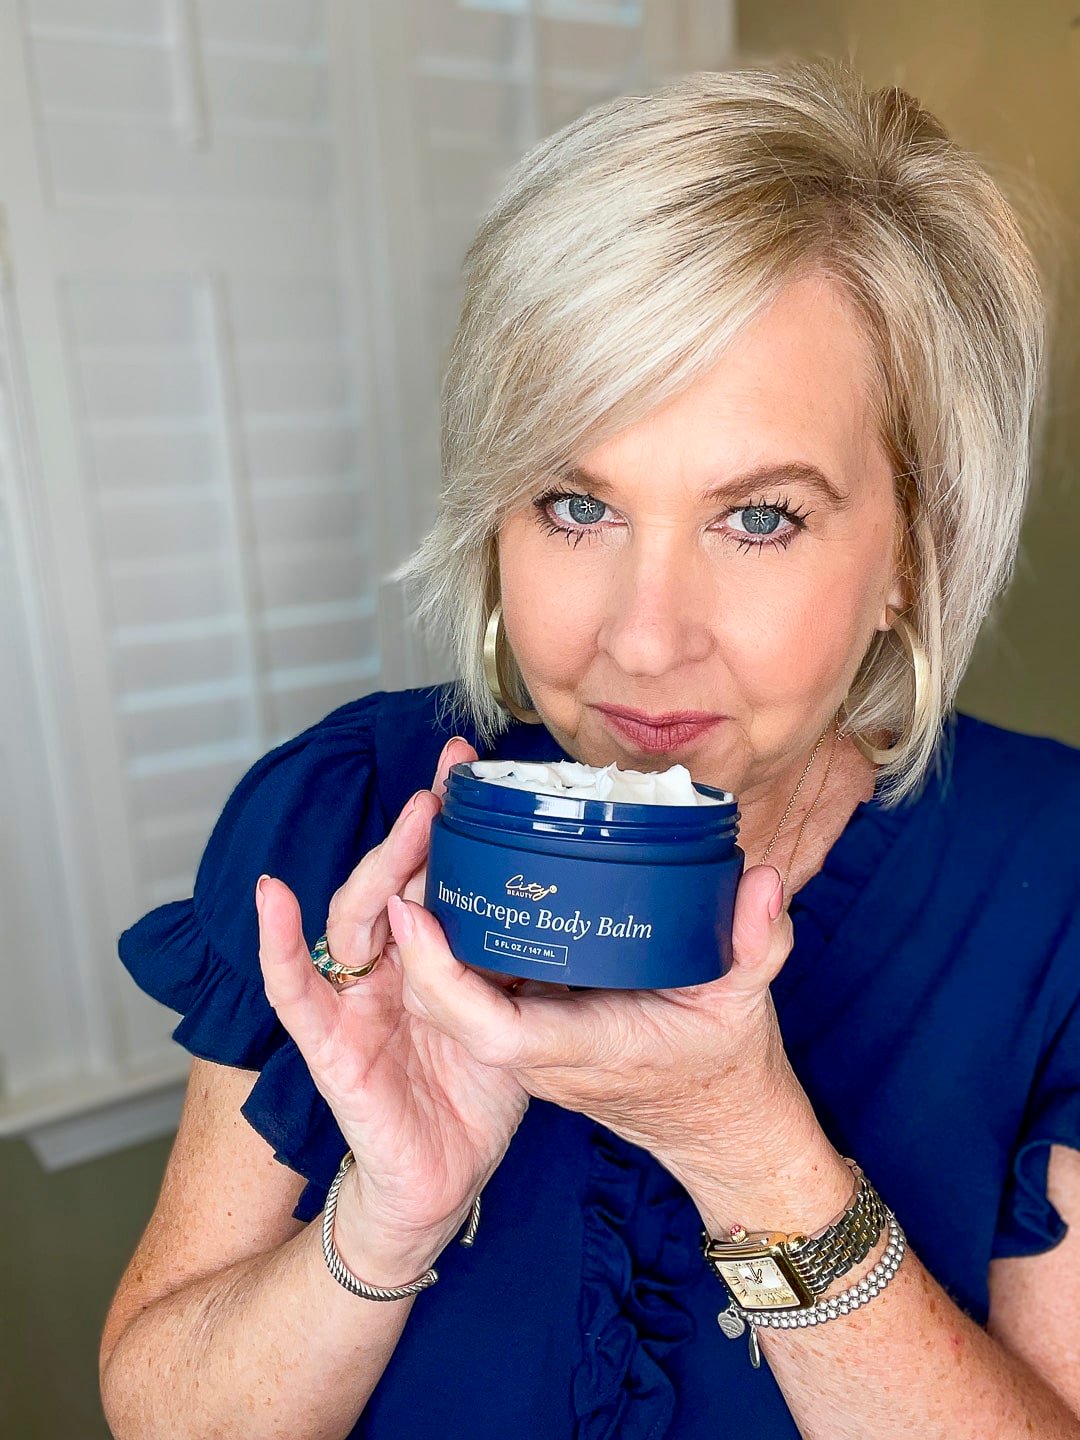 Over 40 Fashion Blogger, Tania Stephens is wearing a blue top and trying City Beauty's Inviscrepe Body Balm10